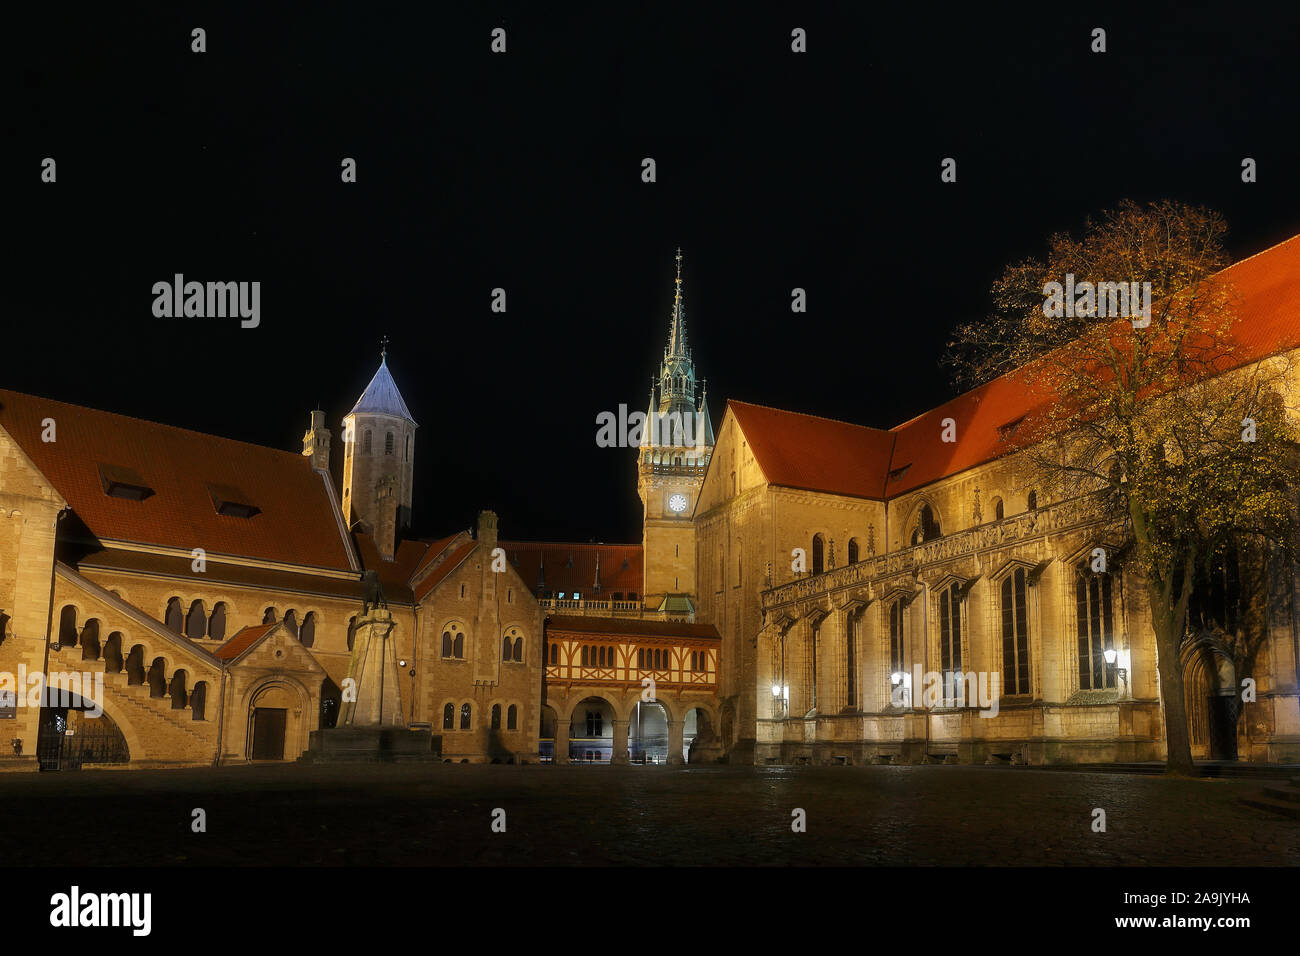 Braunschweig castle and cathedral by night Stock Photo